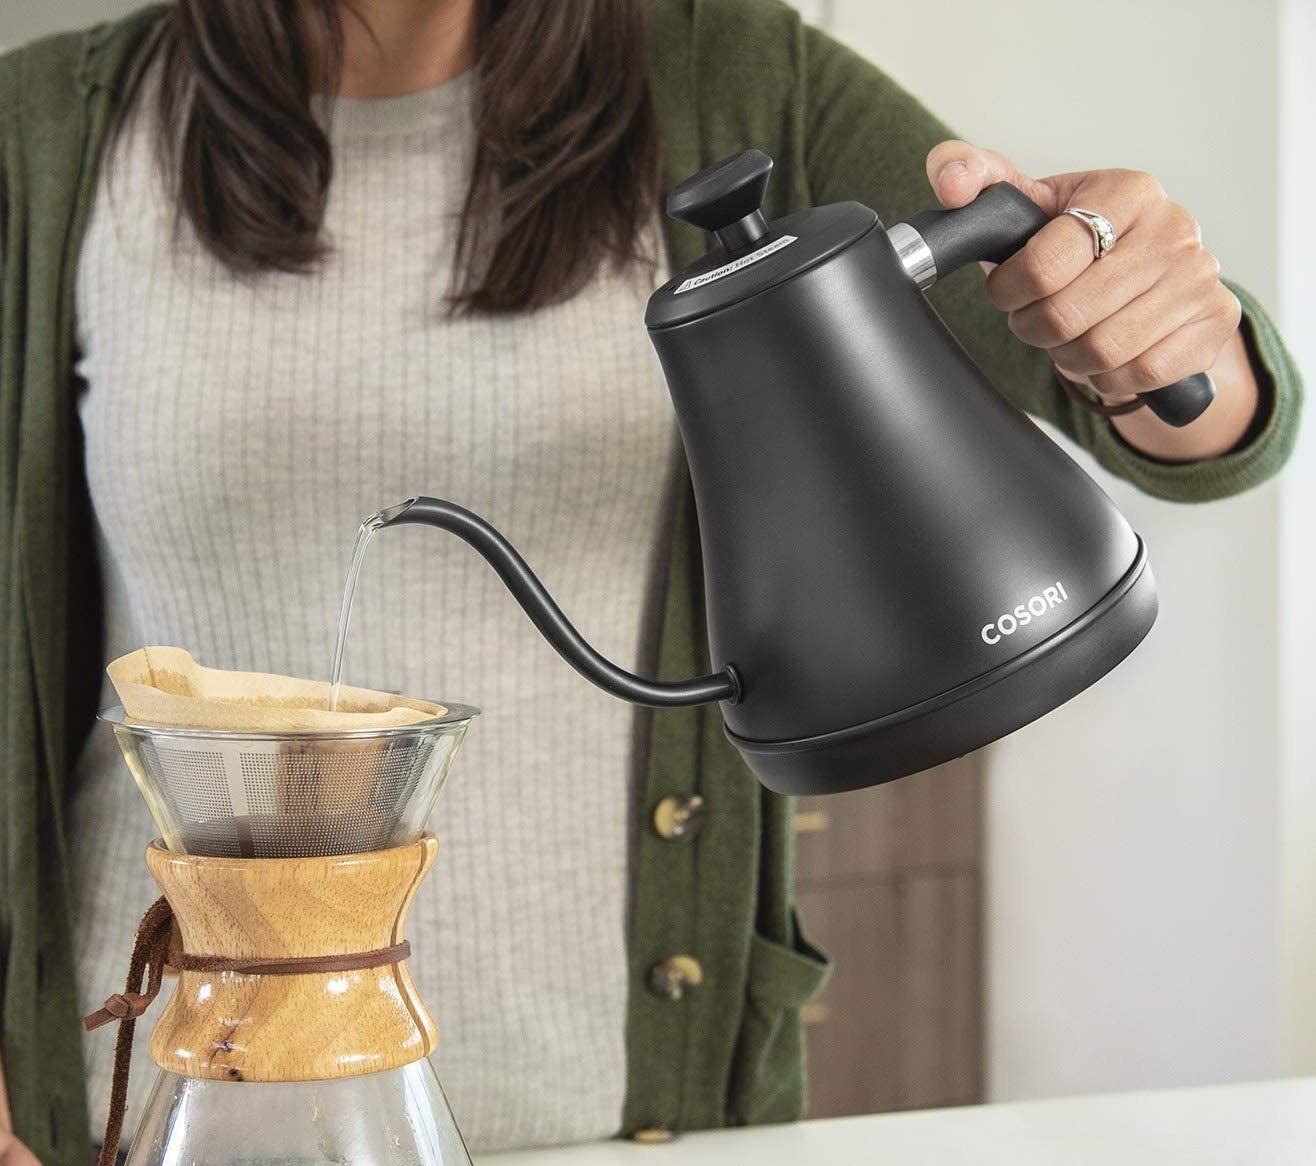 someone using the gooseneck kettle to make pour-over coffee